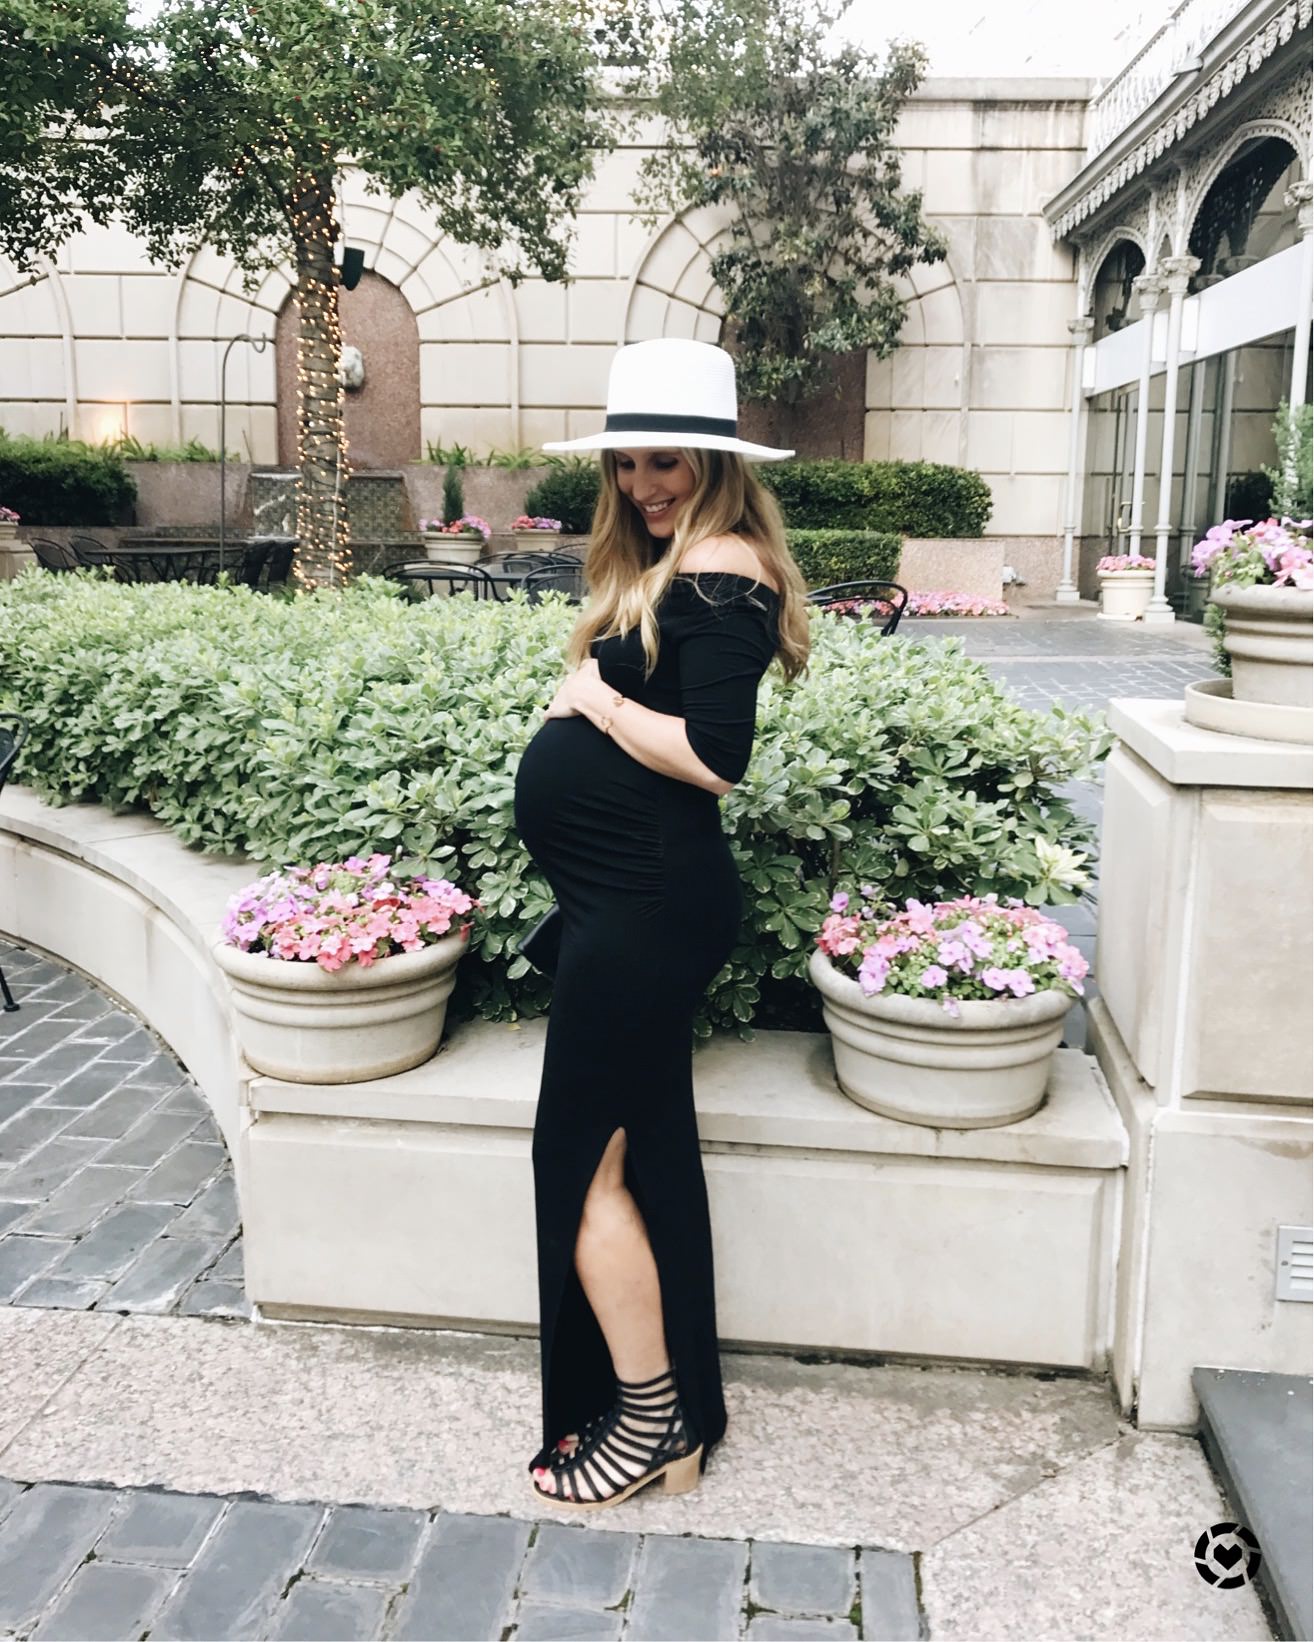 Maternity Style by Lynzy & Co. for the Rewardstyle Conference in a bardot black maxi dress!